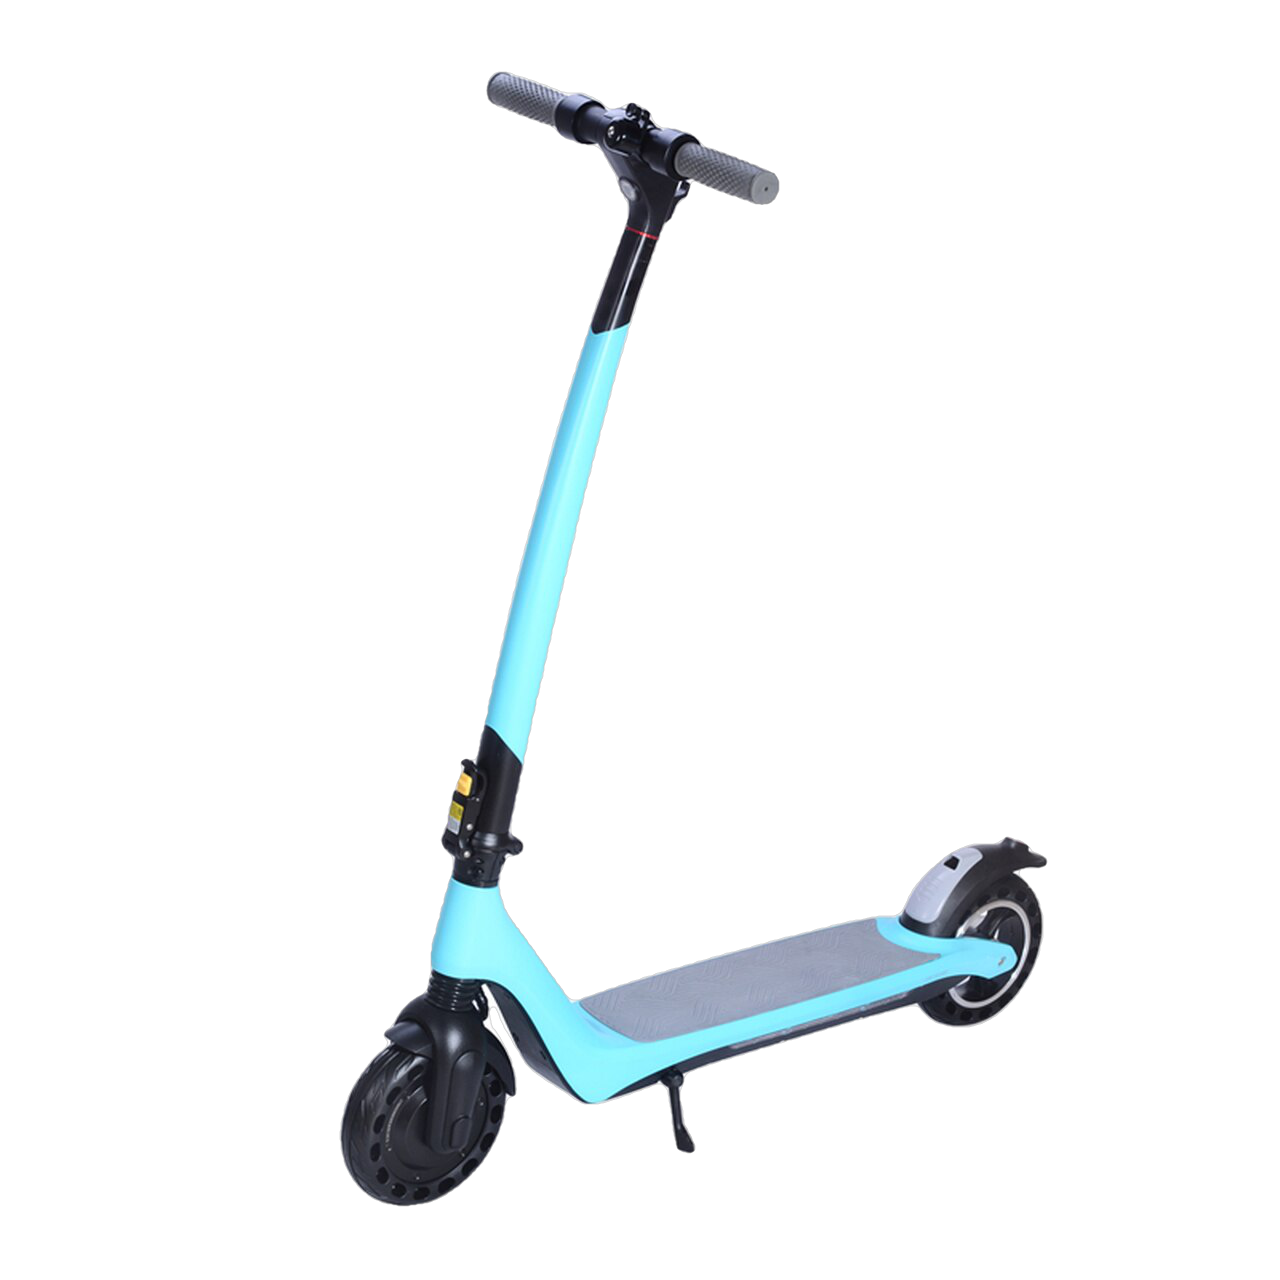 Joyor A3 Up to 21.7 Mile Range 8" Tires Electric Scooter Blue New